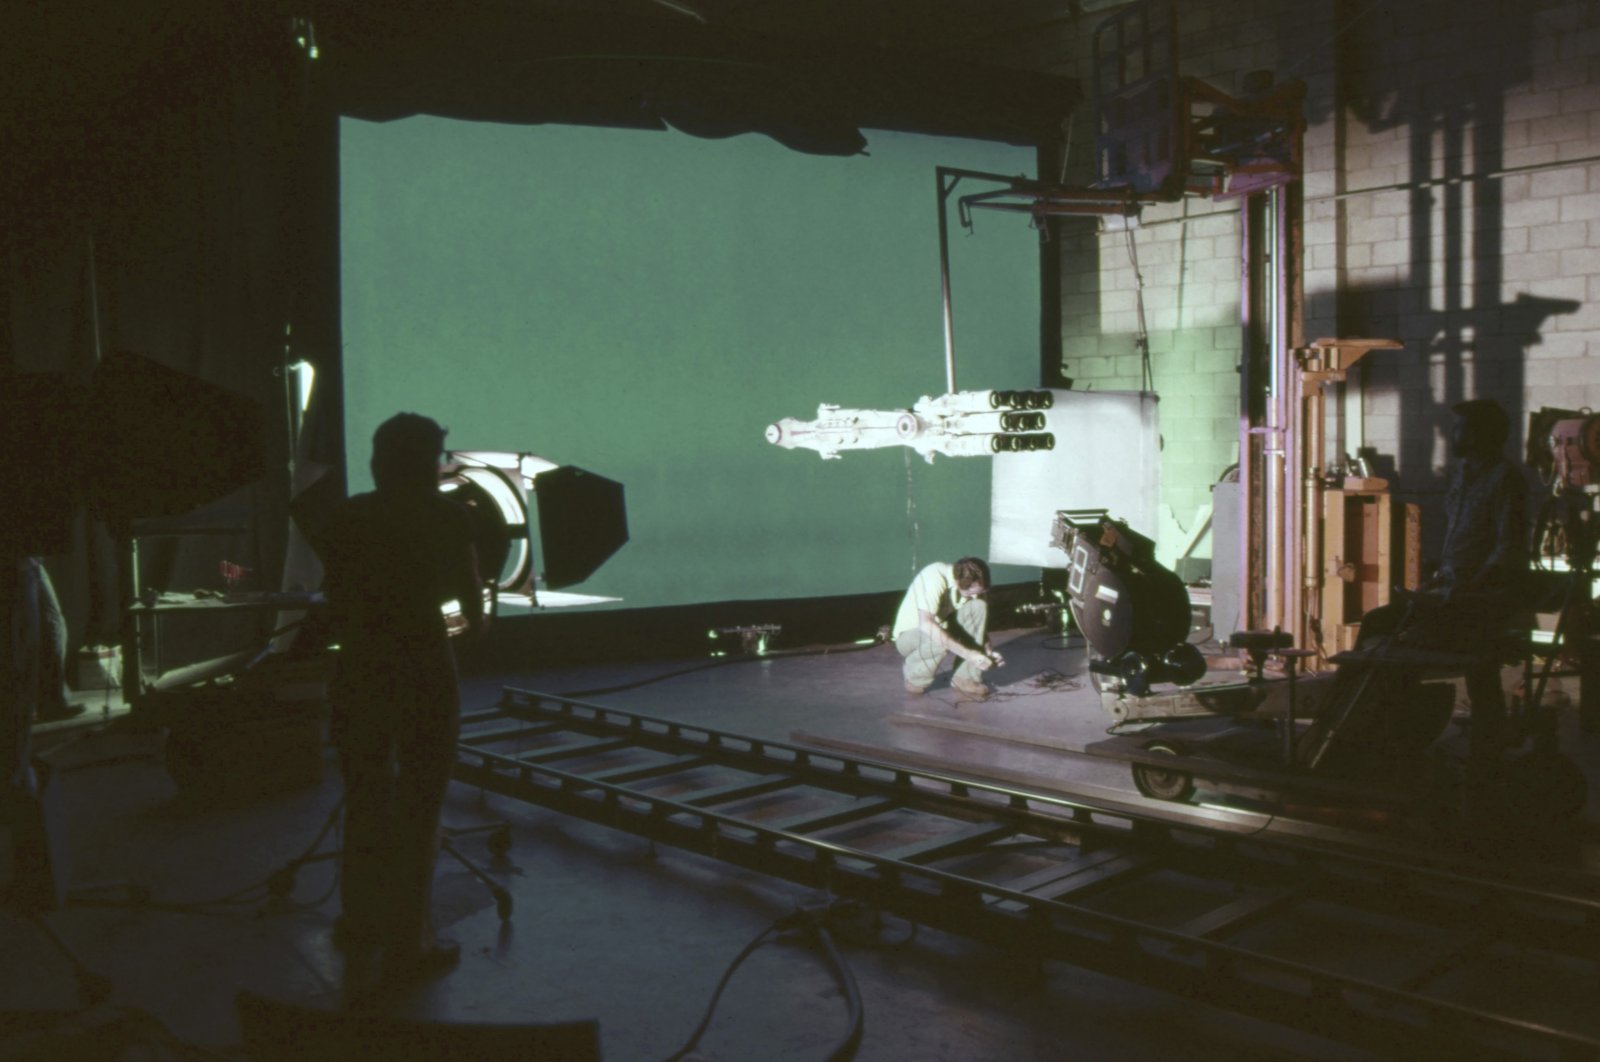 The special effects team films spaceship models during the production of &quot;Star Wars: Episode IV - A New Hope,&quot; 1977. (Getty Images Photo)